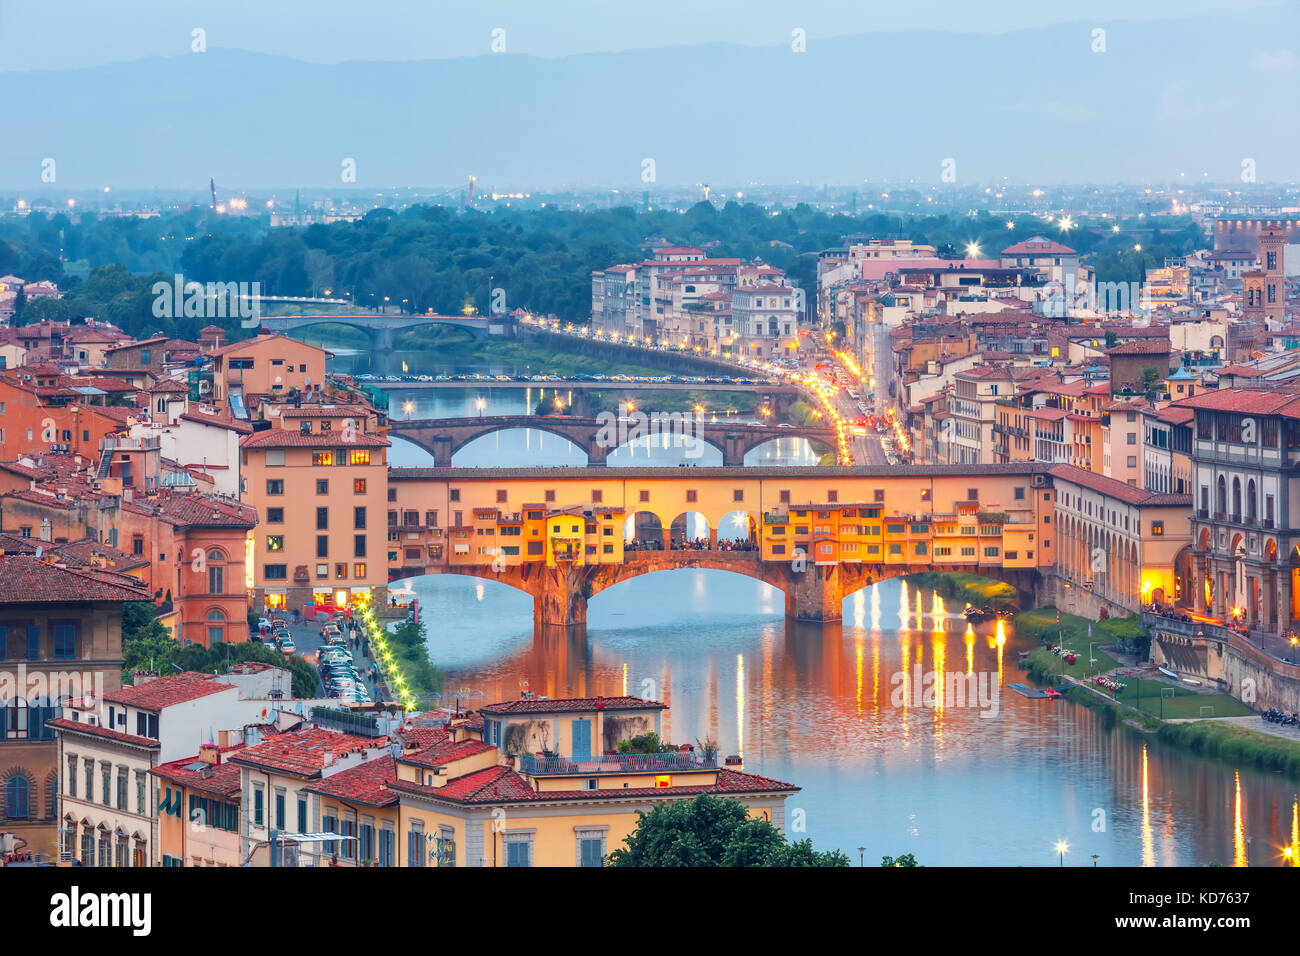 River Arno and Ponte Vecchio in Florence, Italy Stock Photo